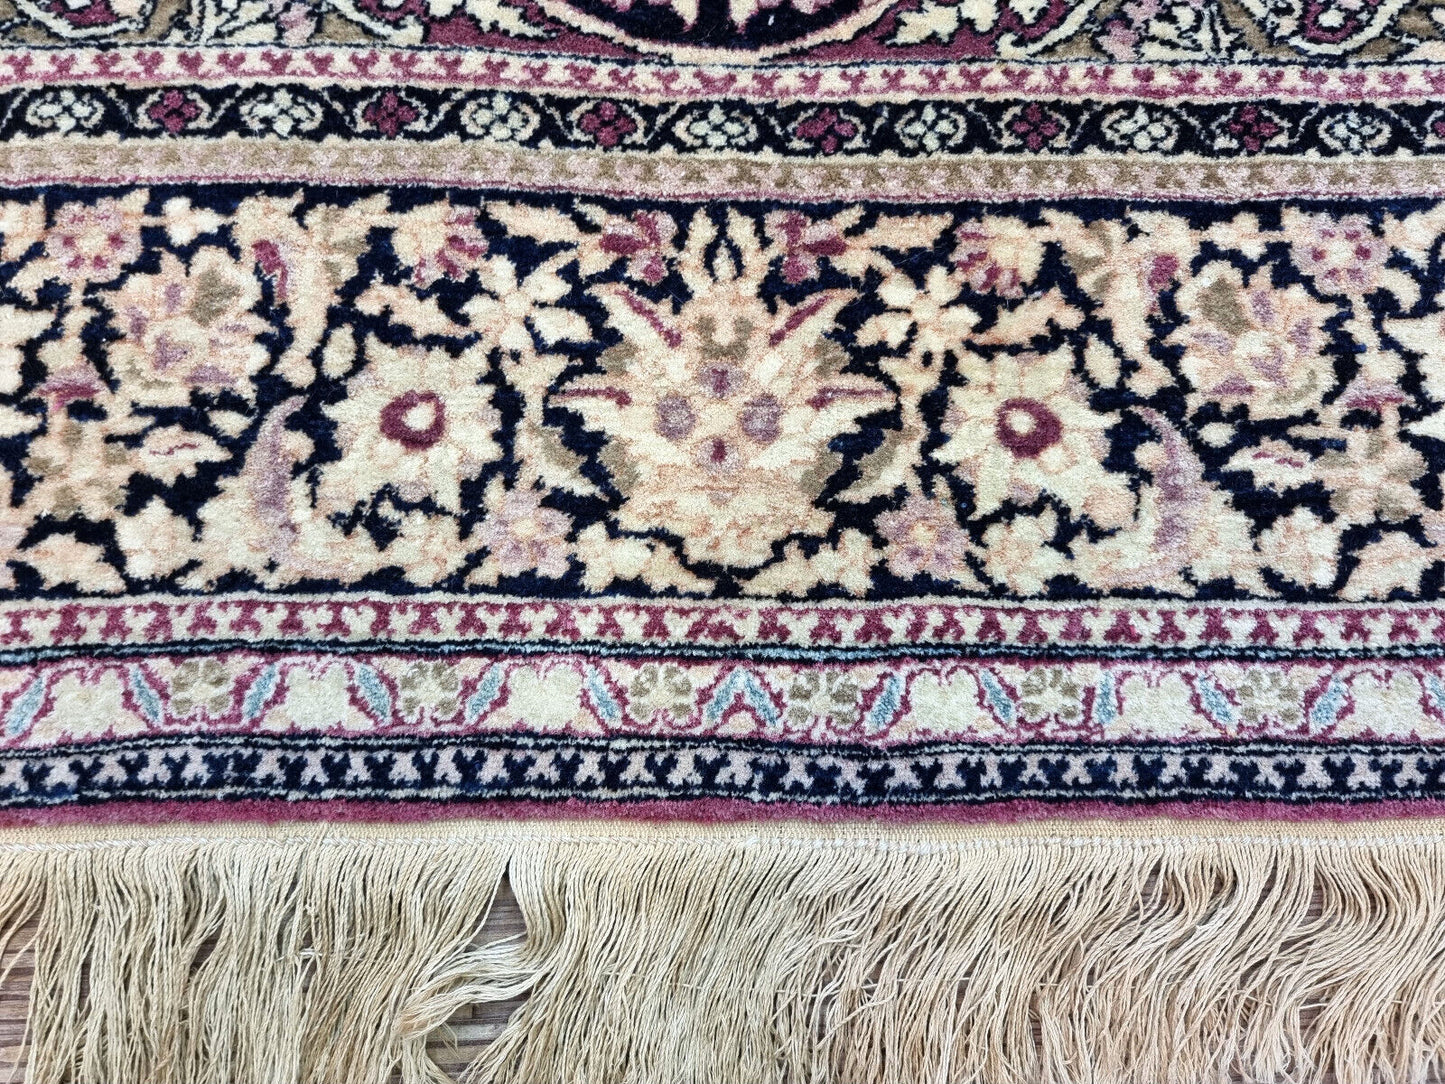 Handmade antiaue Persian Isfahan rug in traditional floral design with large medalllioin. The rug is from the beginning of 20th century in original good condition. It is made in wool.